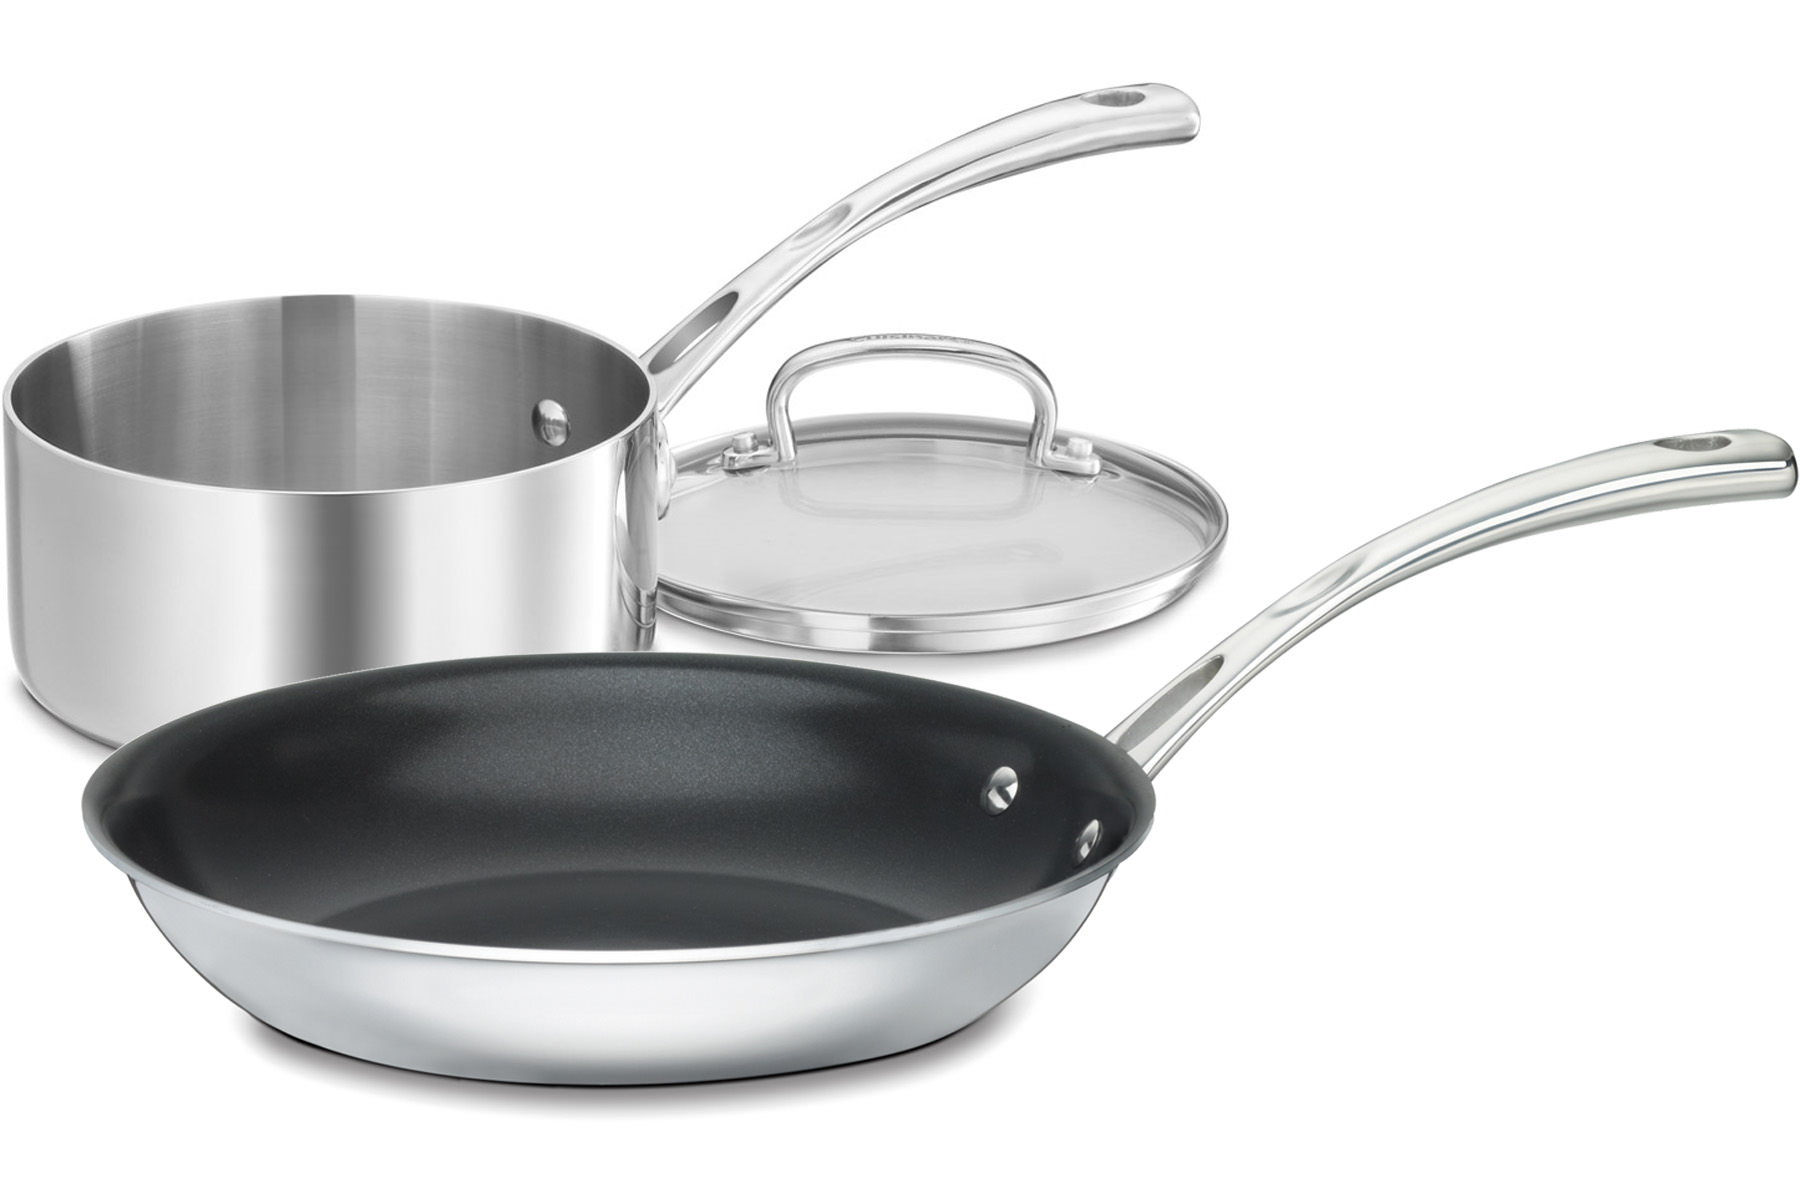 Cuisinart French Classic 3 Piece Non-stick Cookware Set, Fct21-10n3 - image 1 of 2